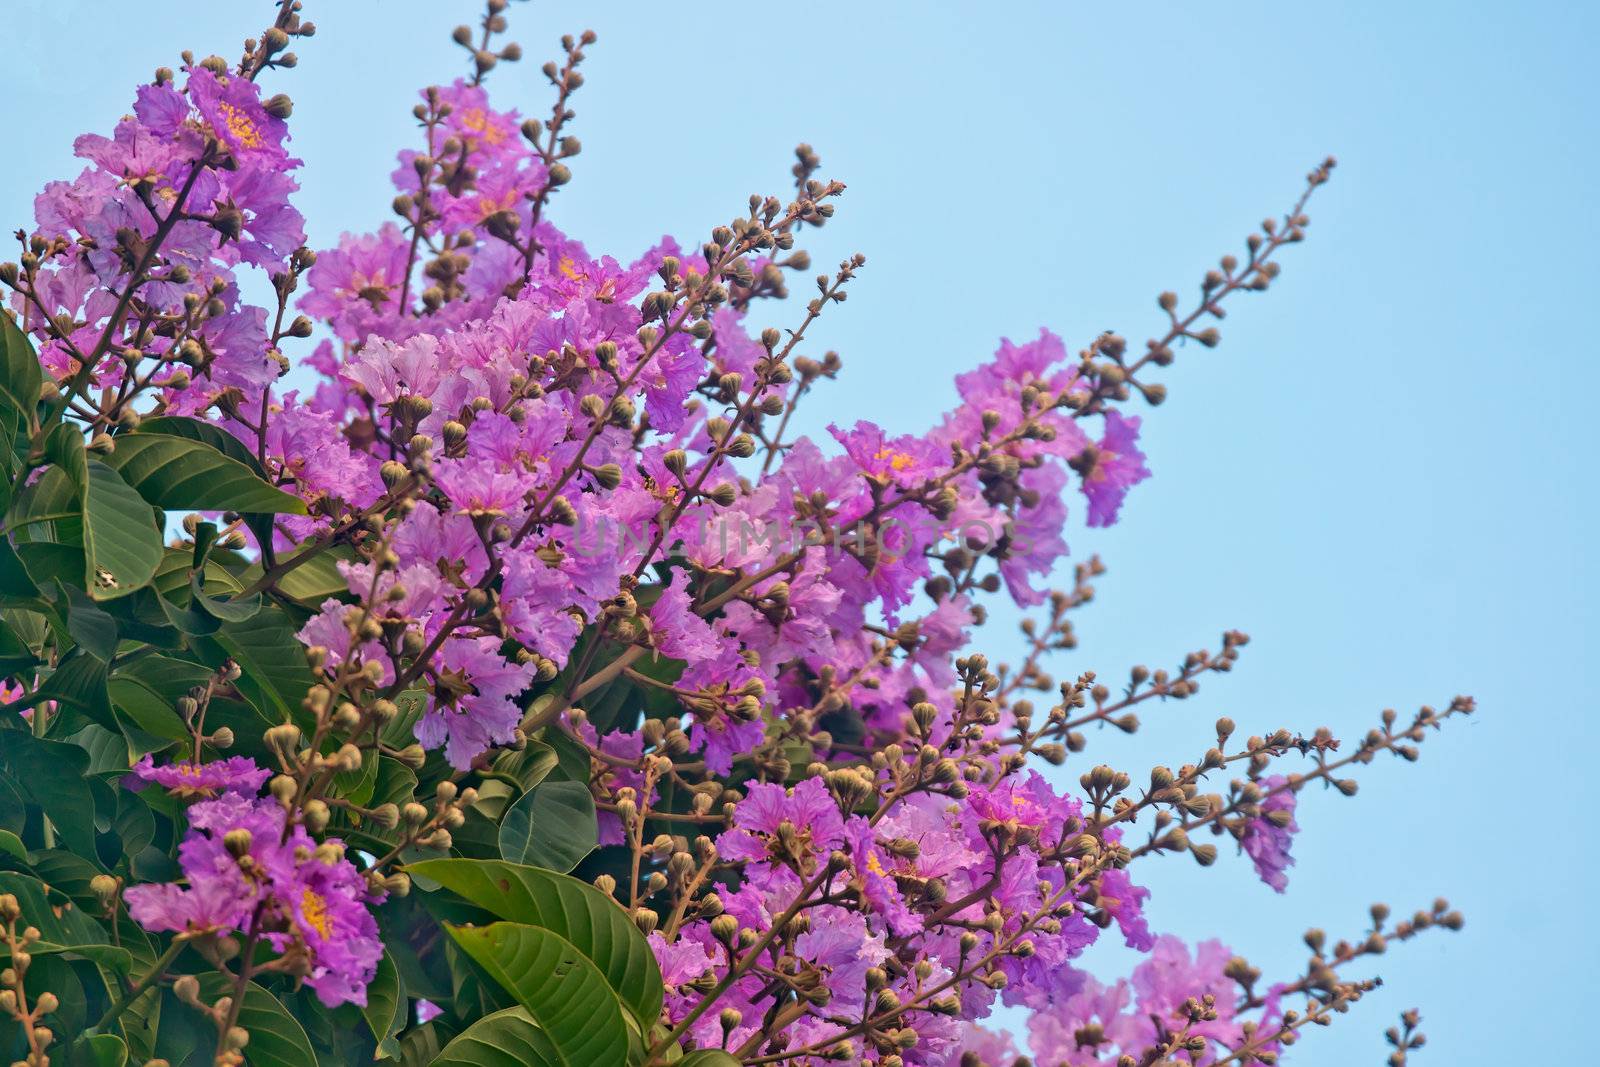 Crape myrtle flowers by xfdly5